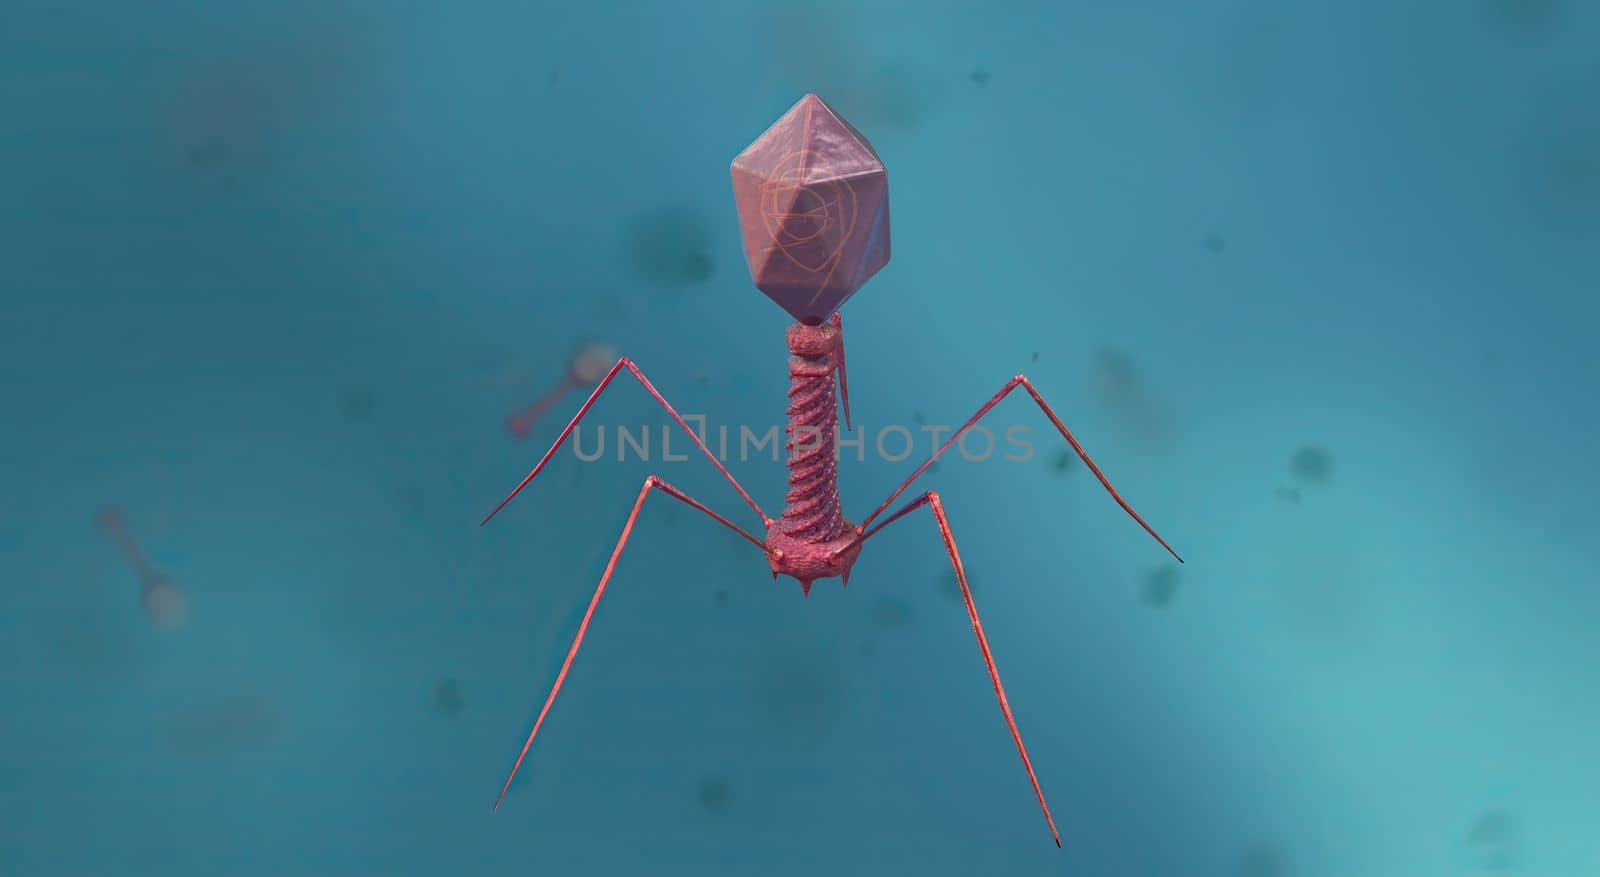 A virus is a submicroscopic infectious agent that replicates only inside the living cells of an organism by creativepic